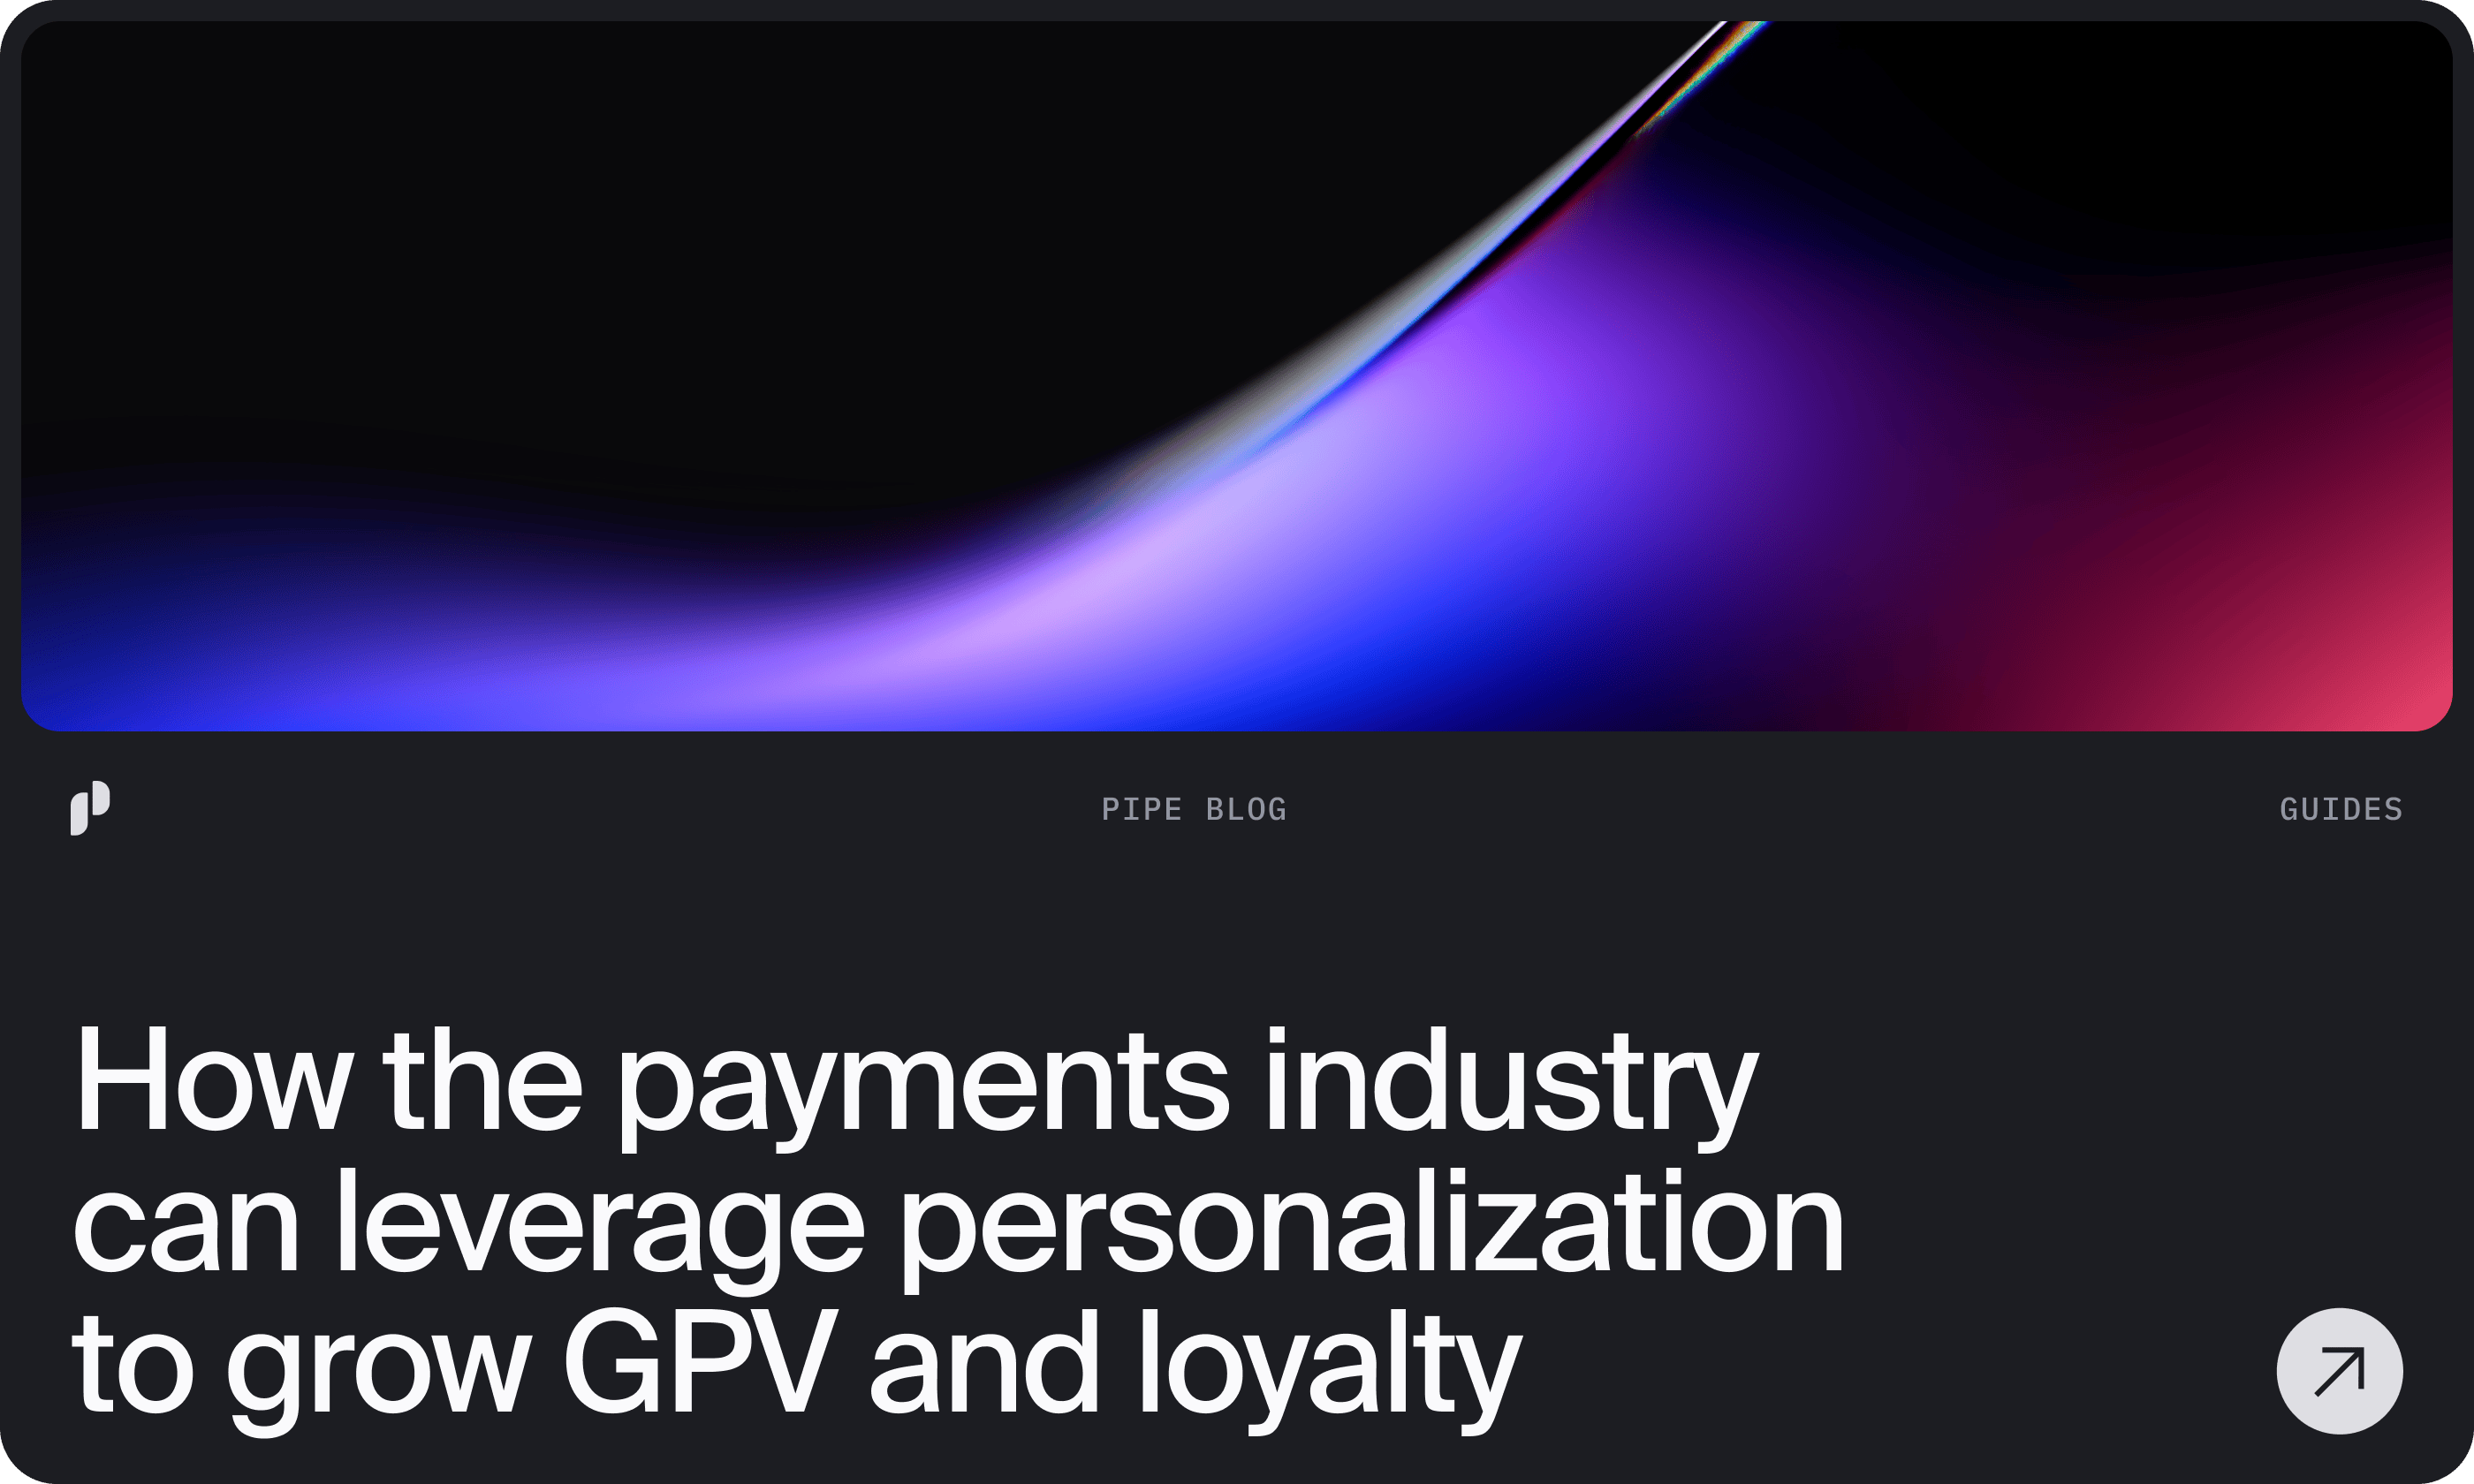 How the Payments Industry Can Leverage Personalization to Grow GPV and Loyalty